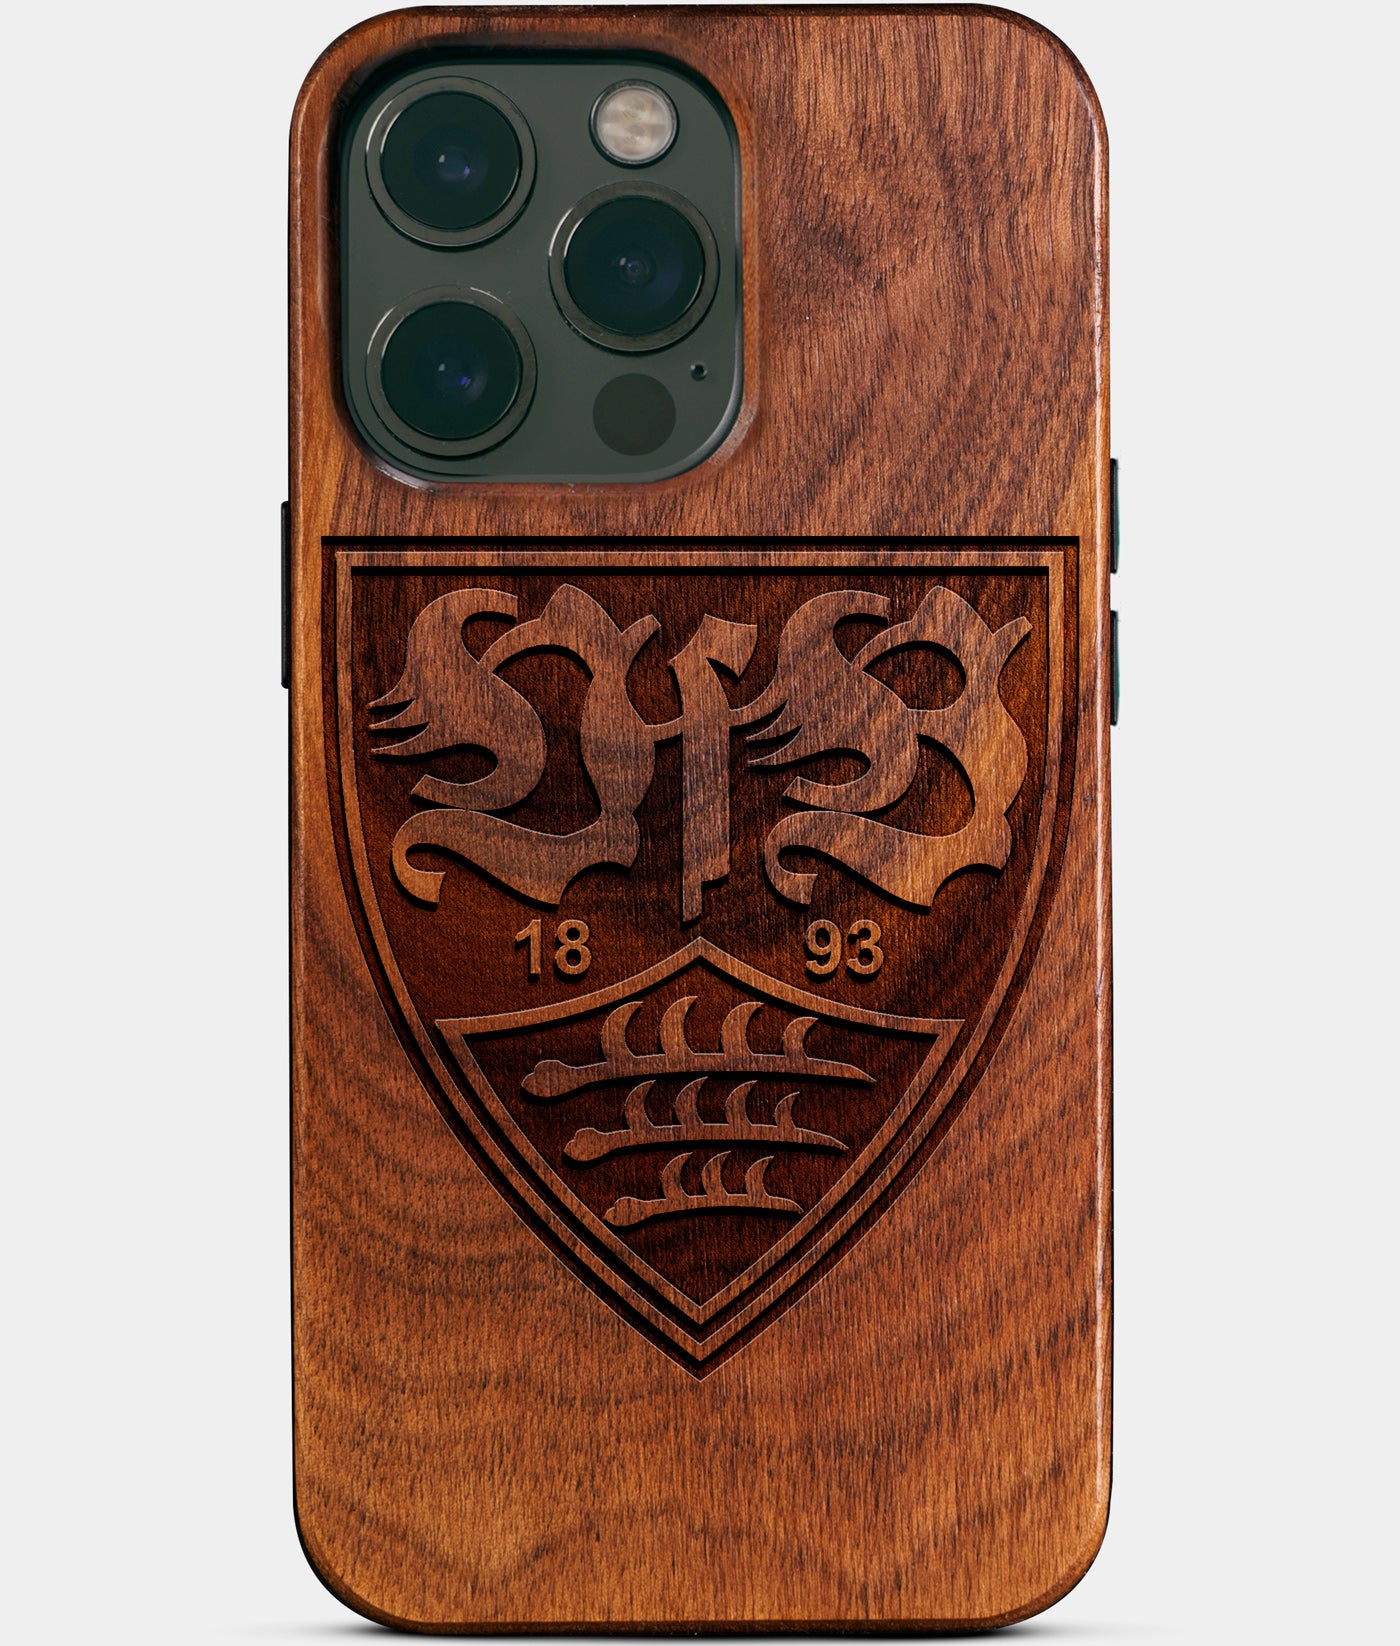 Custom VfB Stuttgart Football iPhone 14/14 Pro/14 Pro Max/14 Plus Case - Carved Wood VfB Stuttgart Football Cover - Eco-friendly VfB Stuttgart Football iPhone 14 Case - Custom VfB Stuttgart Football  Gift For Him - VfB Stuttgart Football Gifts For Men - 2022 CBF Brasil Football Christmas Gifts - Carved Wood Custom VfB Stuttgart Gift For Him - Monogrammed unusual VfB Stuttgart Football gifts iPhone 14 | iPhone 14 Pro | 14 Plus Covers | iPhone 13 | iPhone 13 Pro | iPhone 13 Pro Max | iPhone 12 Pro Max | iPhone 12 by Engraved In Nature